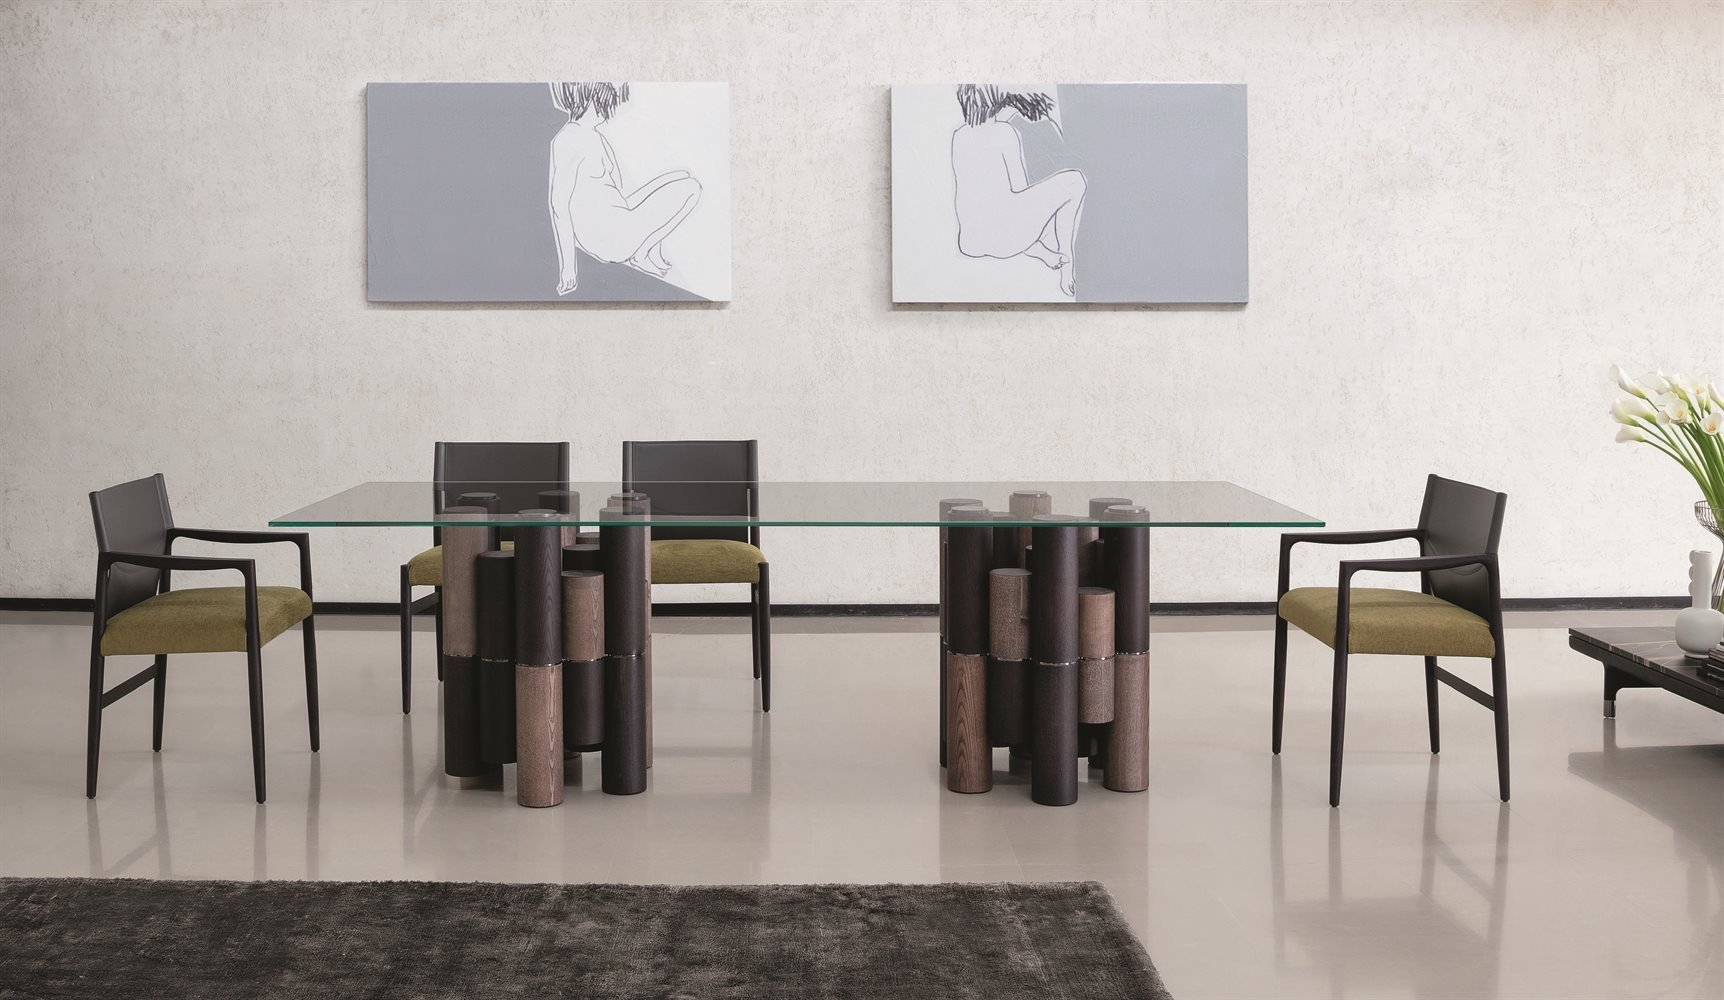 Pilar Dining Table from Porada, designed by M. Marconato and T. Zappa